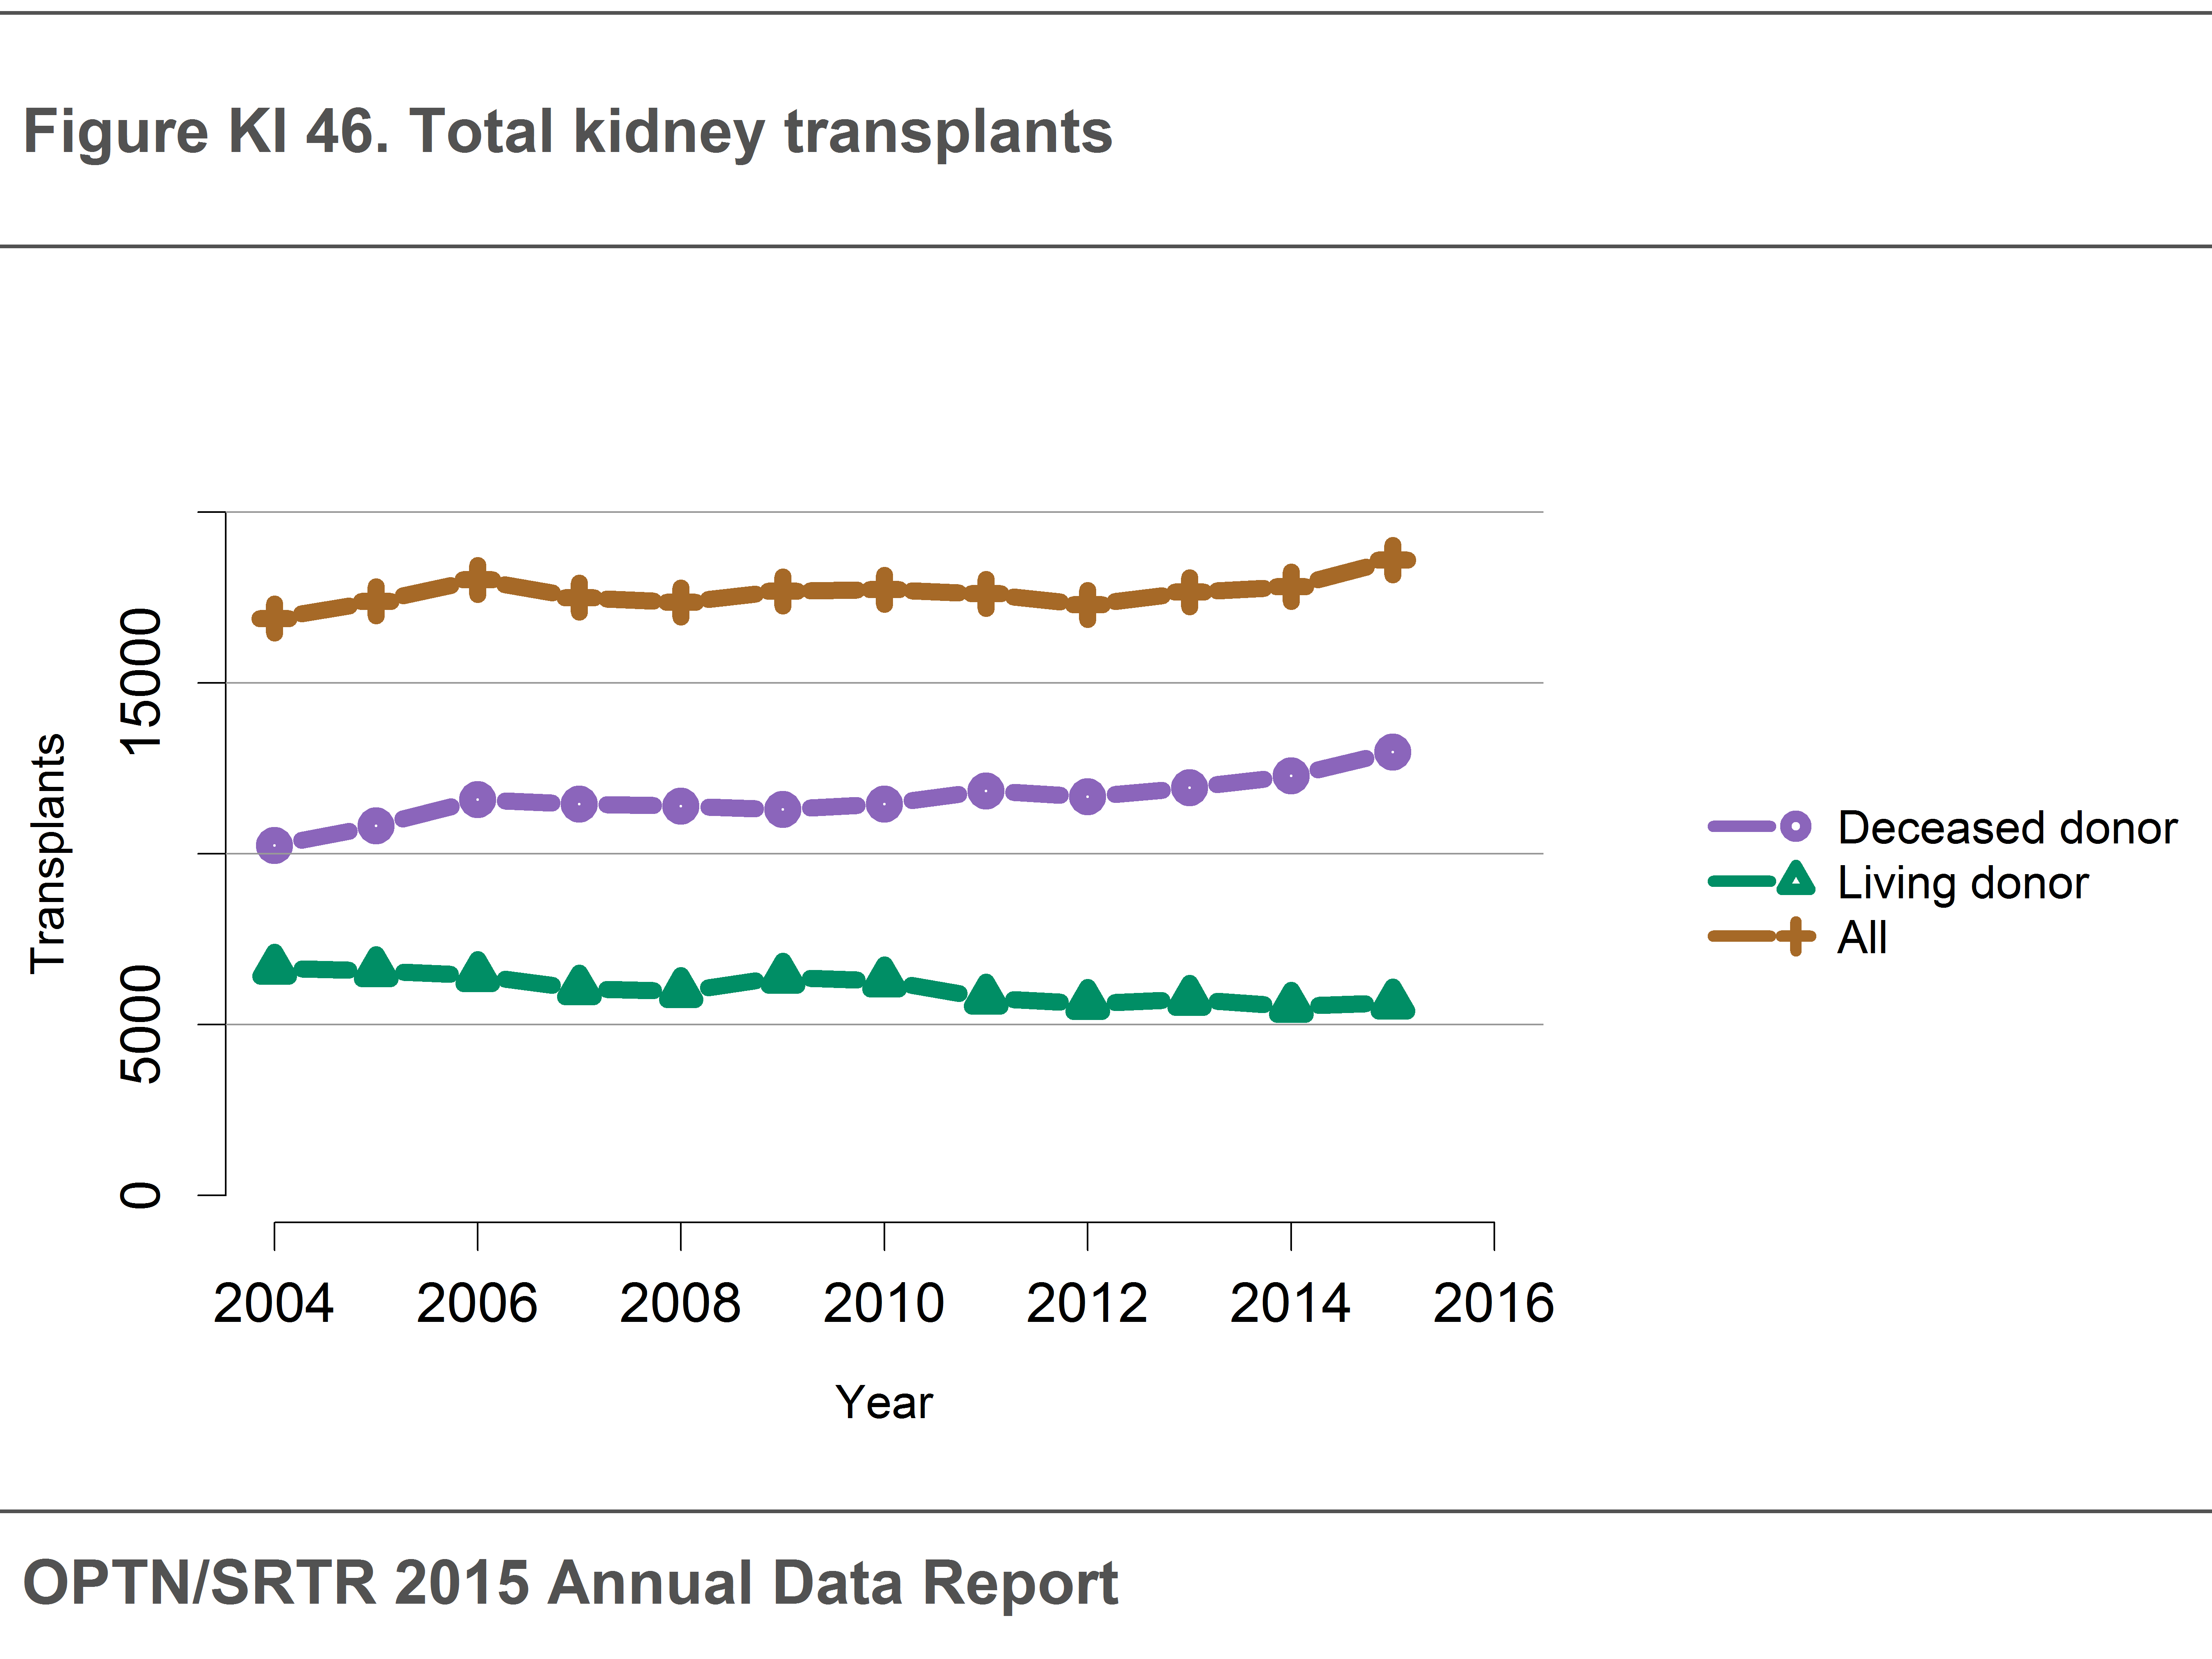 Trends in total kidney transplants from 2004 to 2016, by donor type.